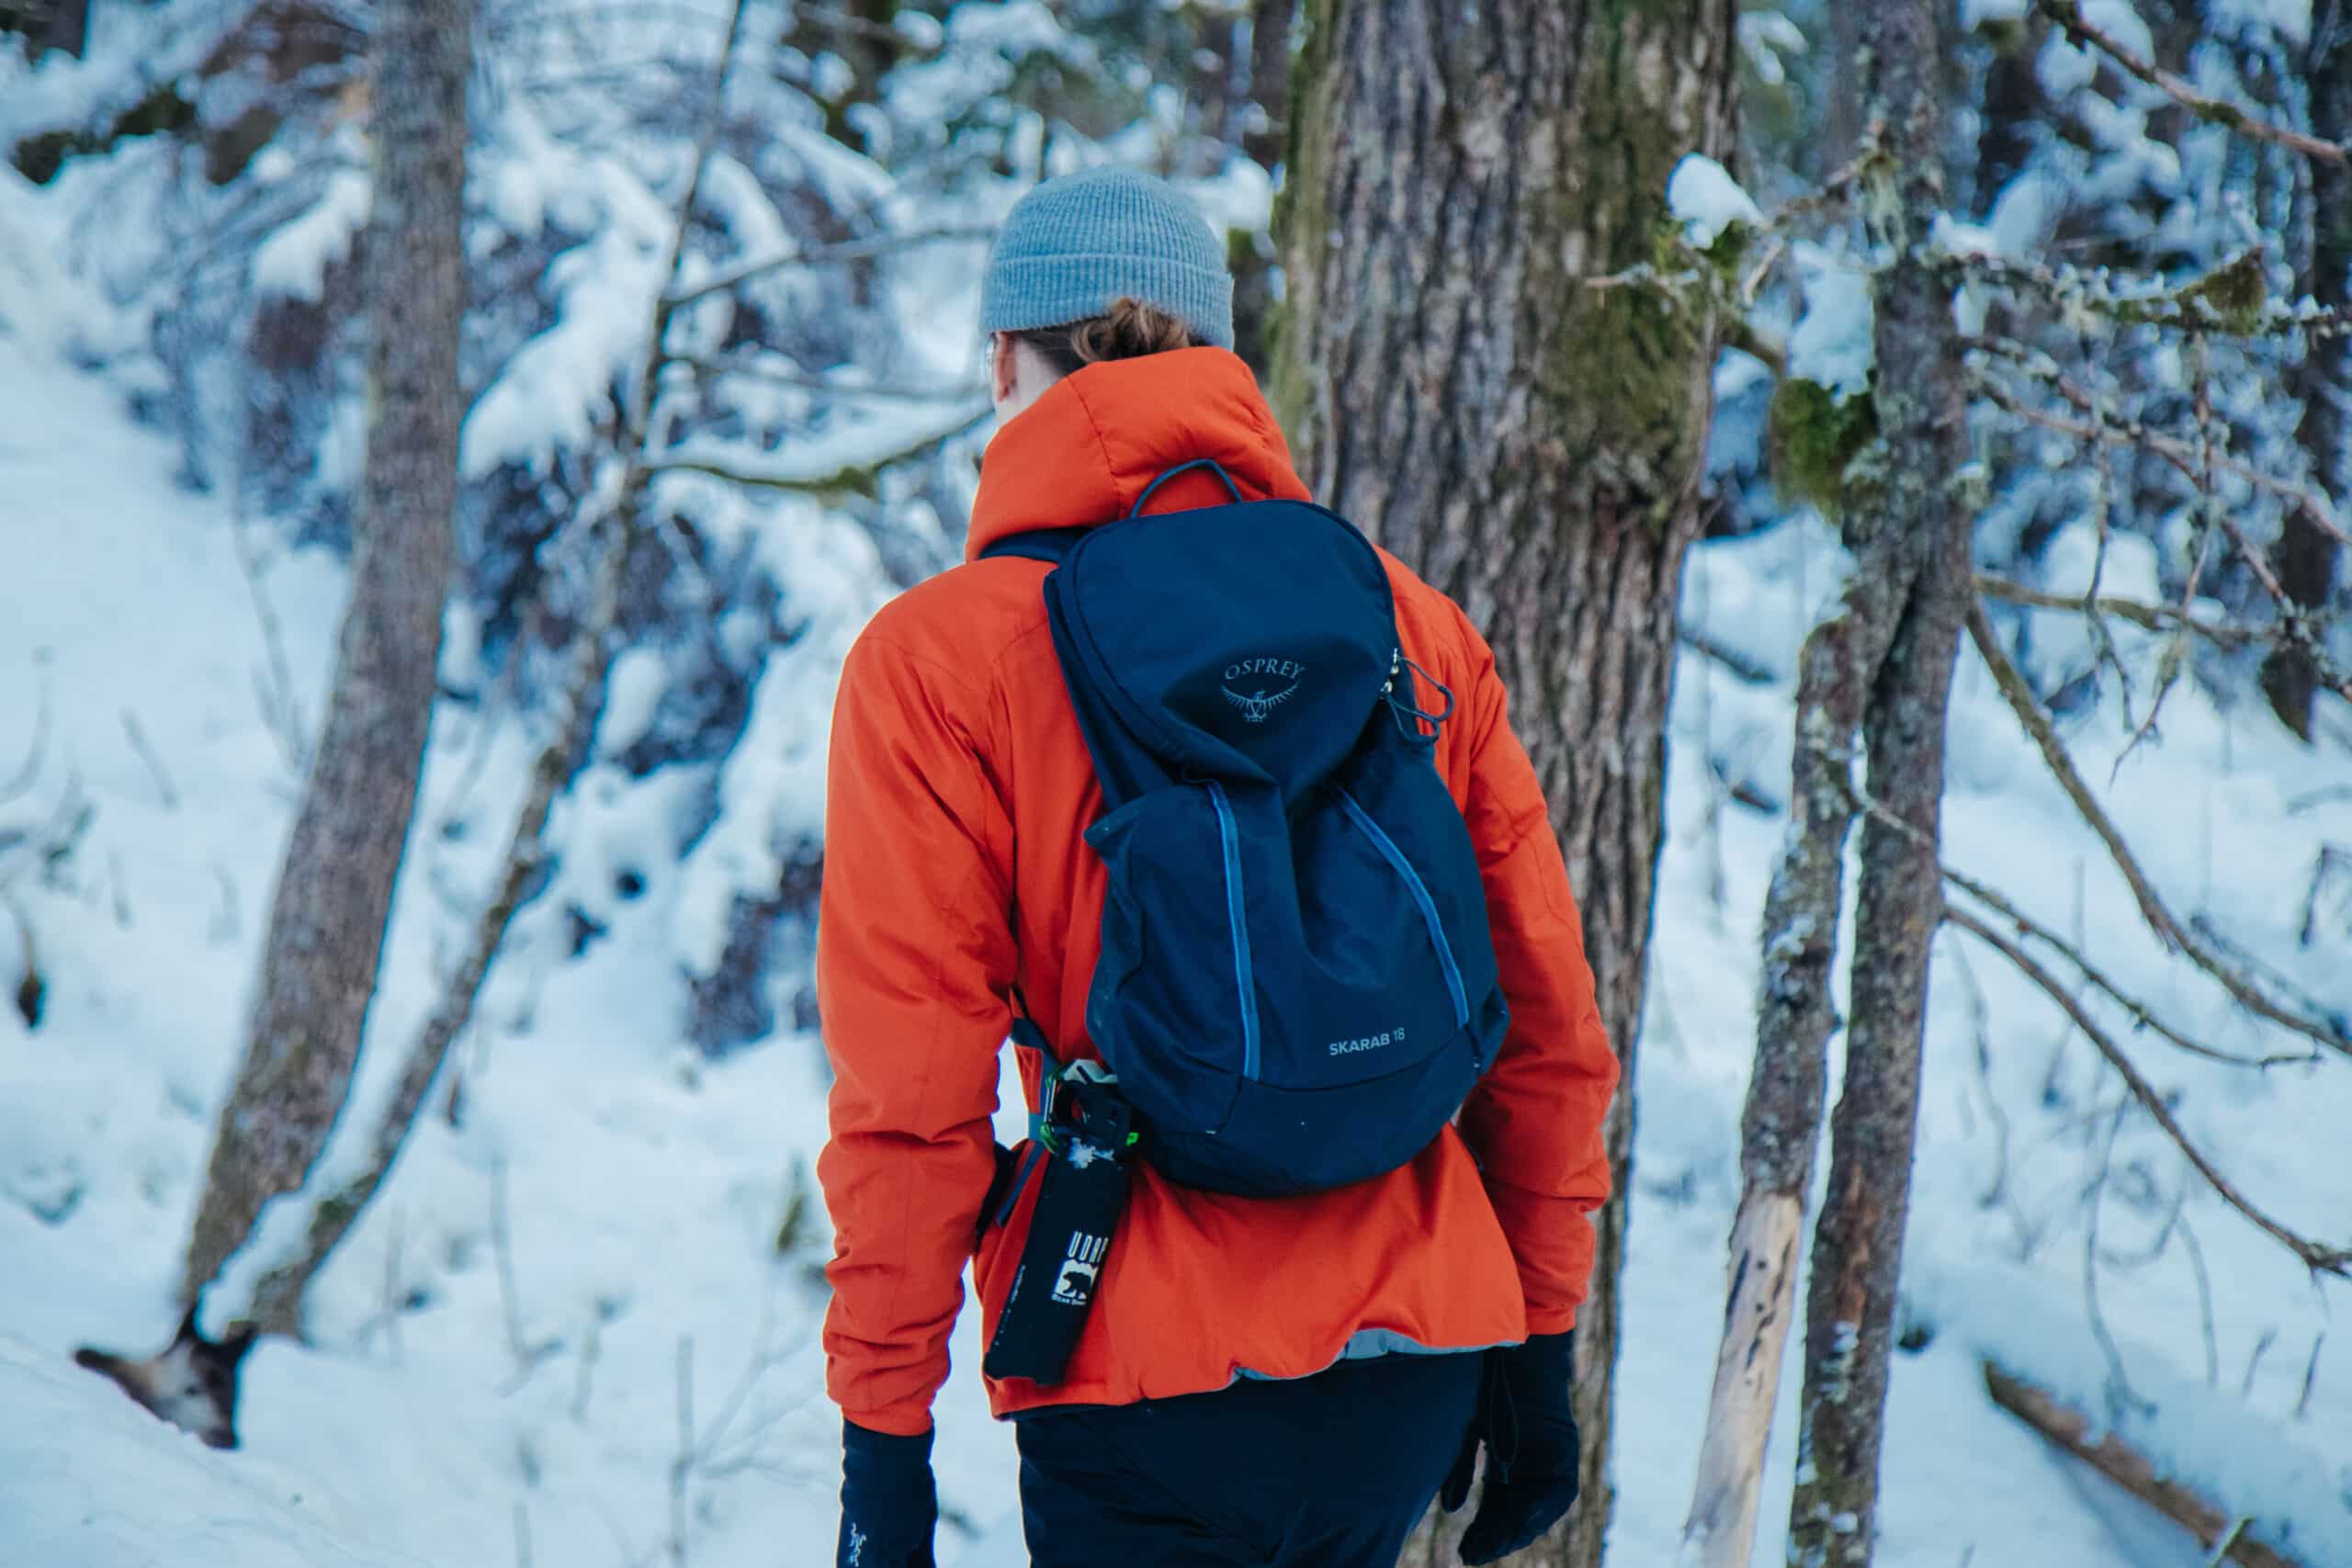 Essential gear for winter hikes: Osprey daypack worn by man hiking in wooded area